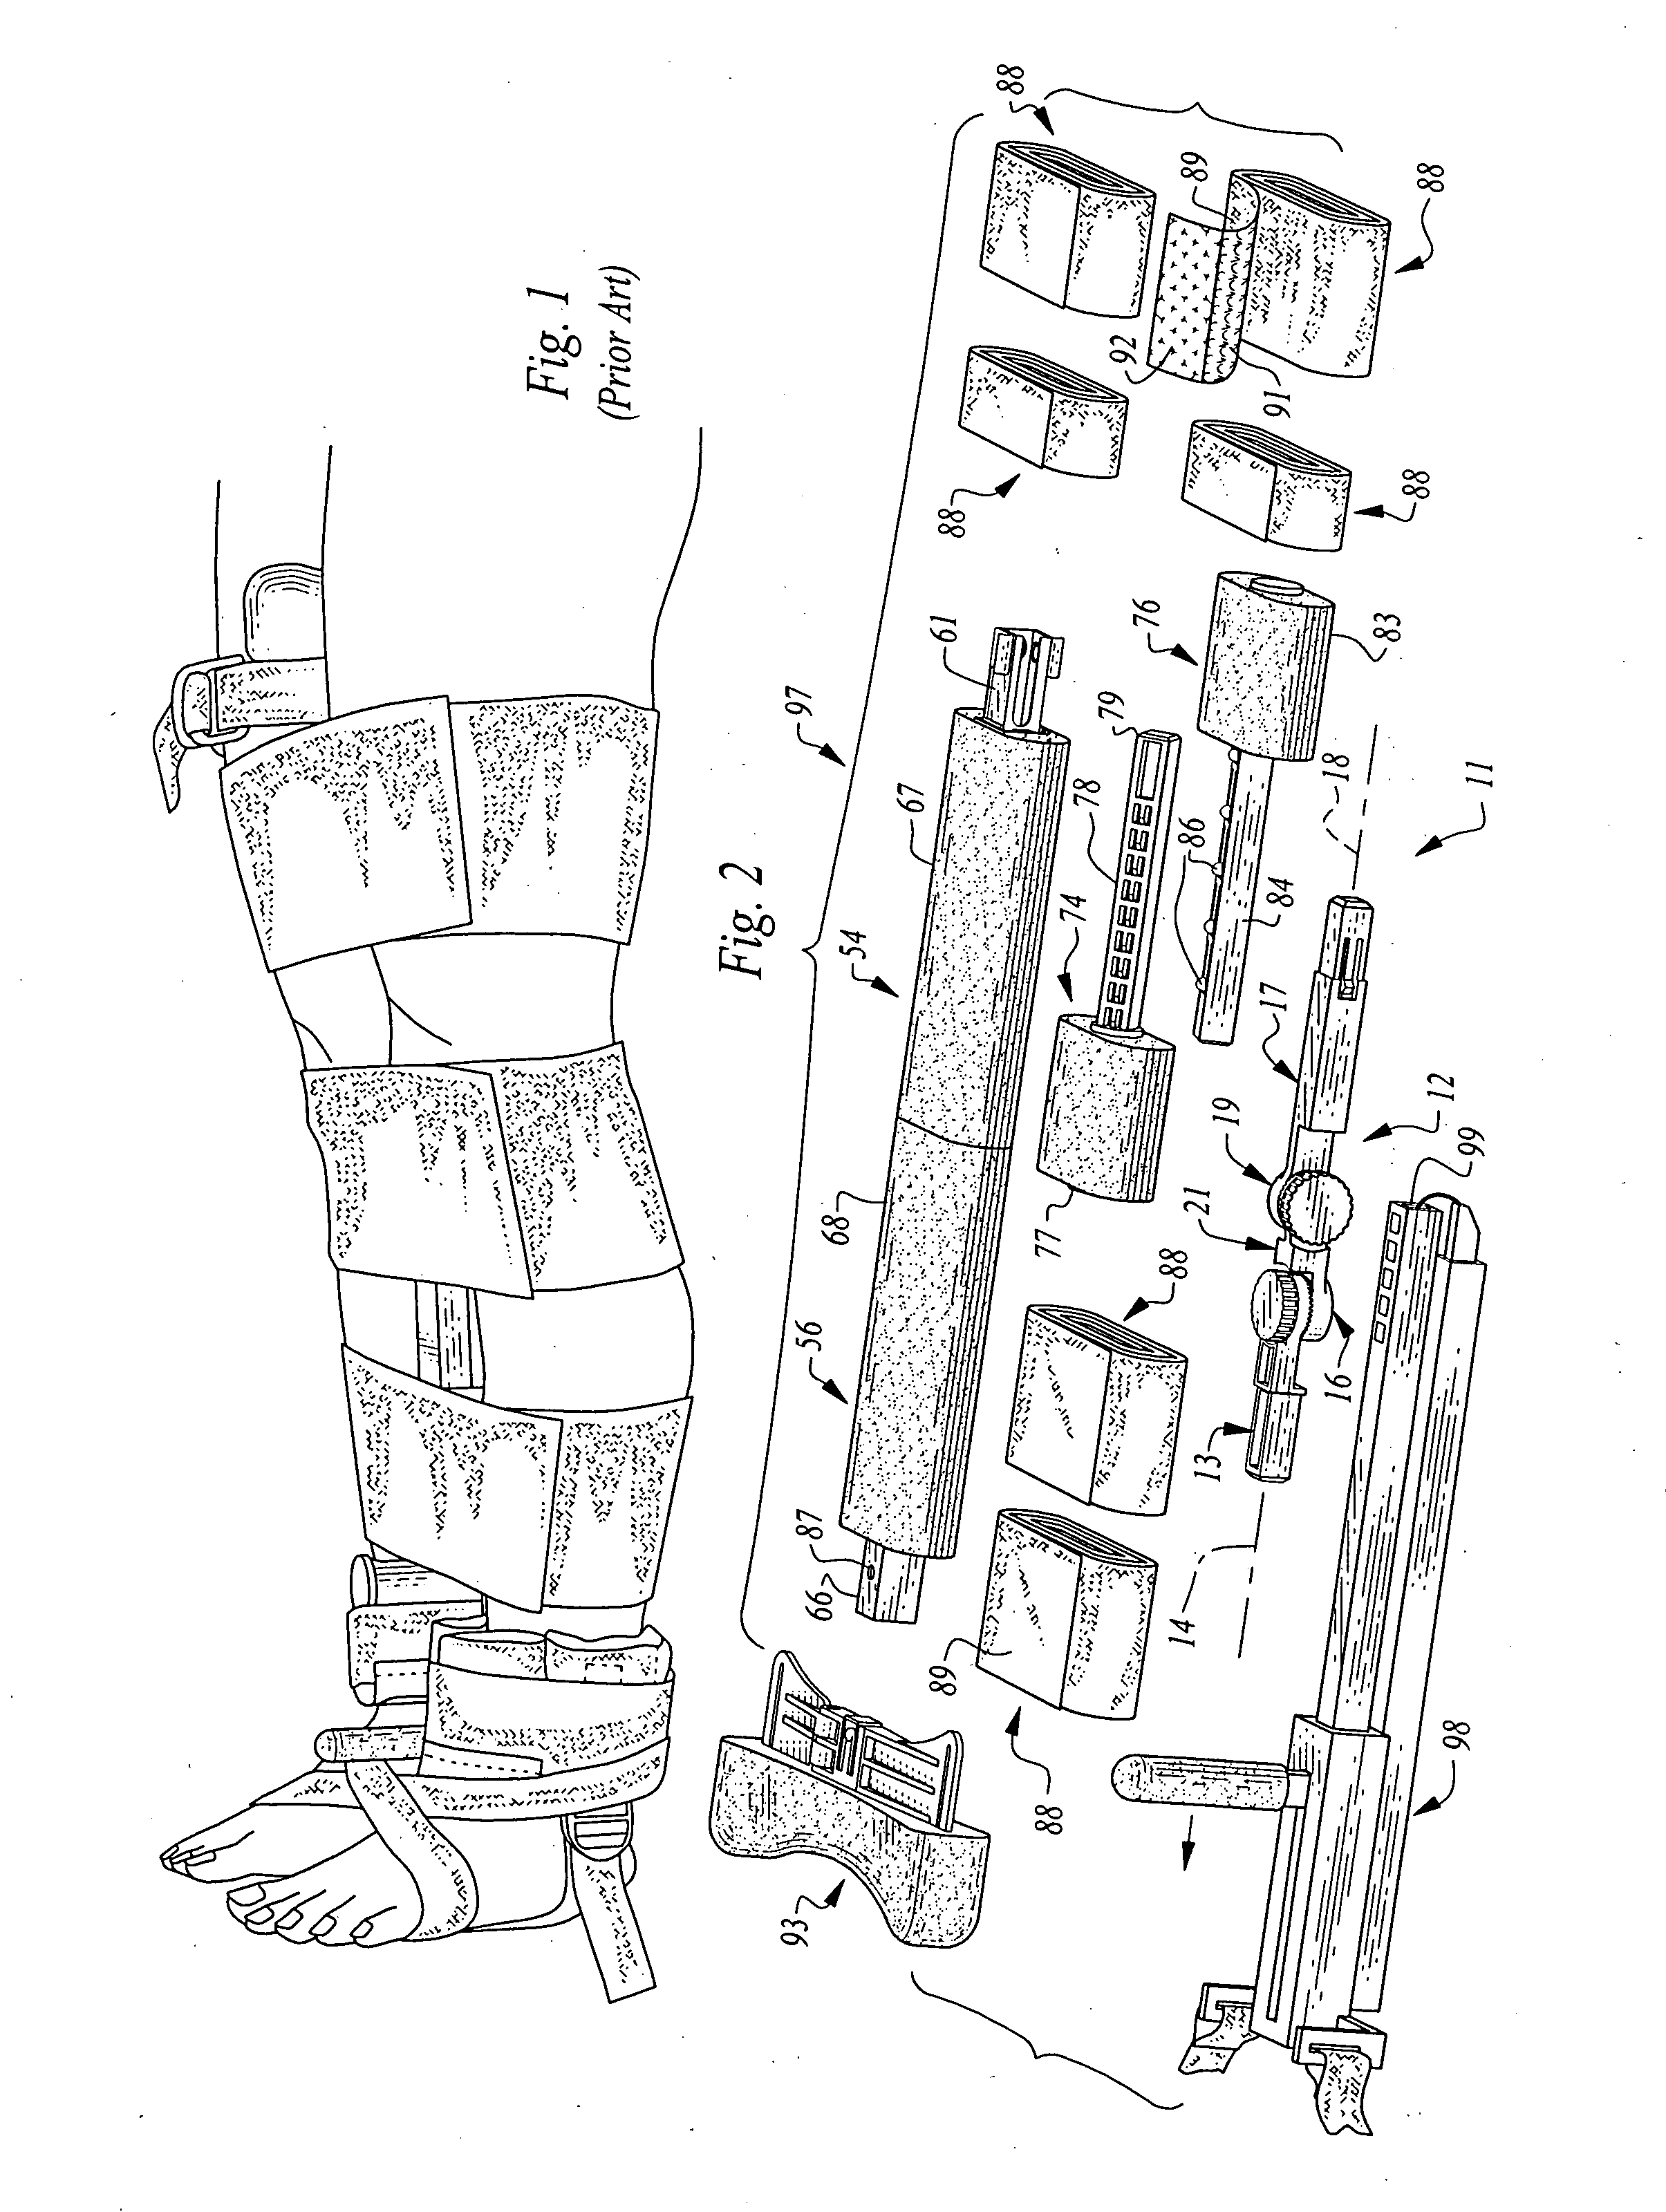 Medical splinting apparatus and methods for using same